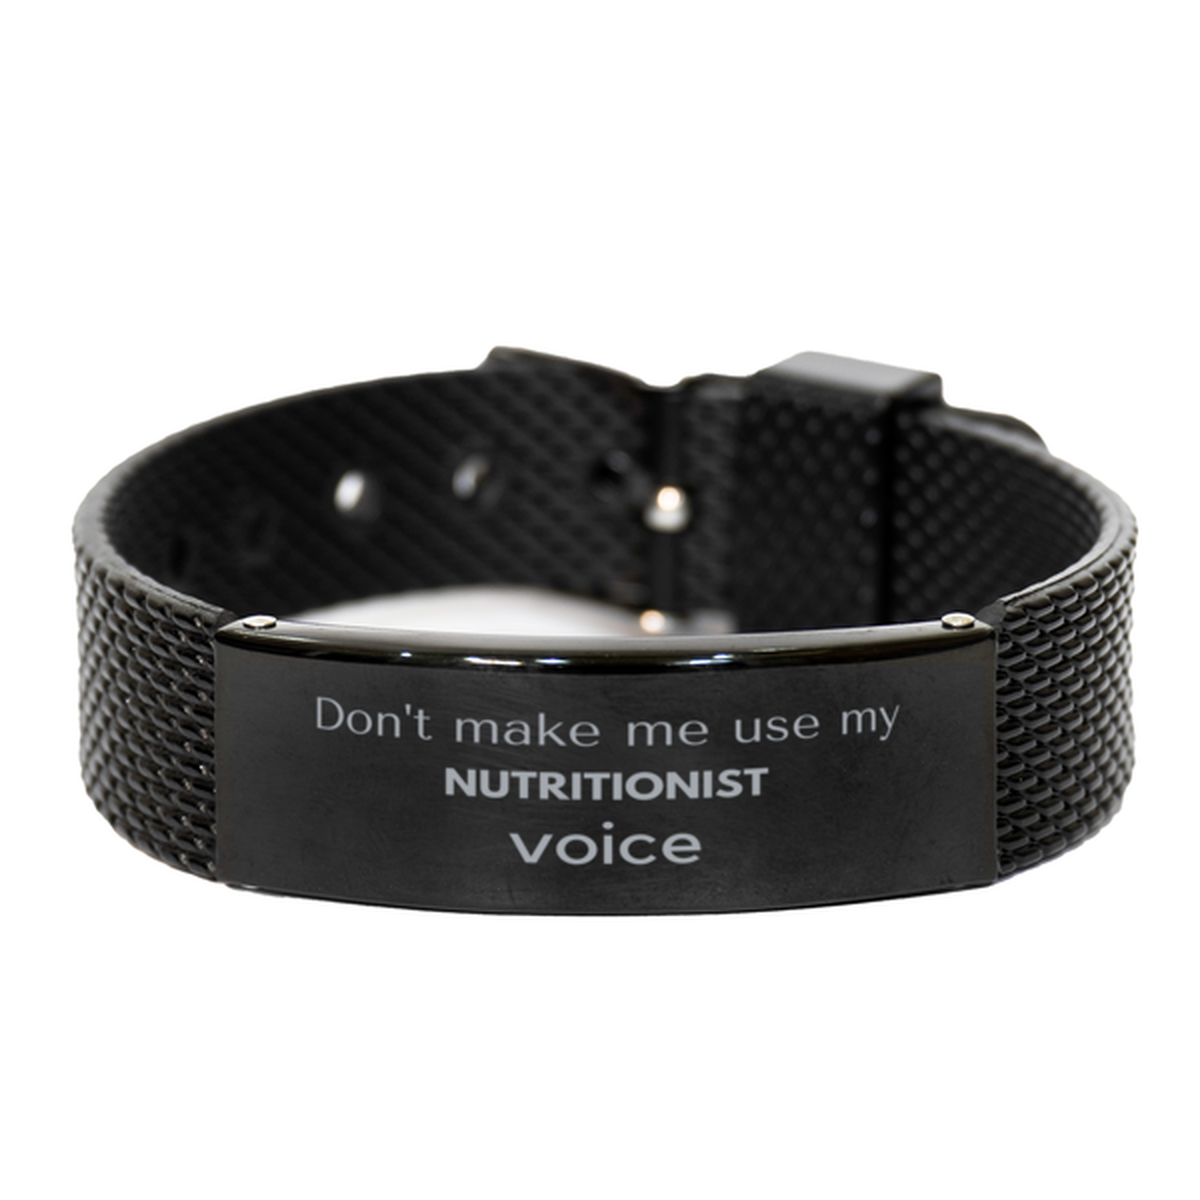 Don't make me use my Nutritionist voice, Sarcasm Nutritionist Gifts, Christmas Nutritionist Black Shark Mesh Bracelet Birthday Unique Gifts For Nutritionist Coworkers, Men, Women, Colleague, Friends